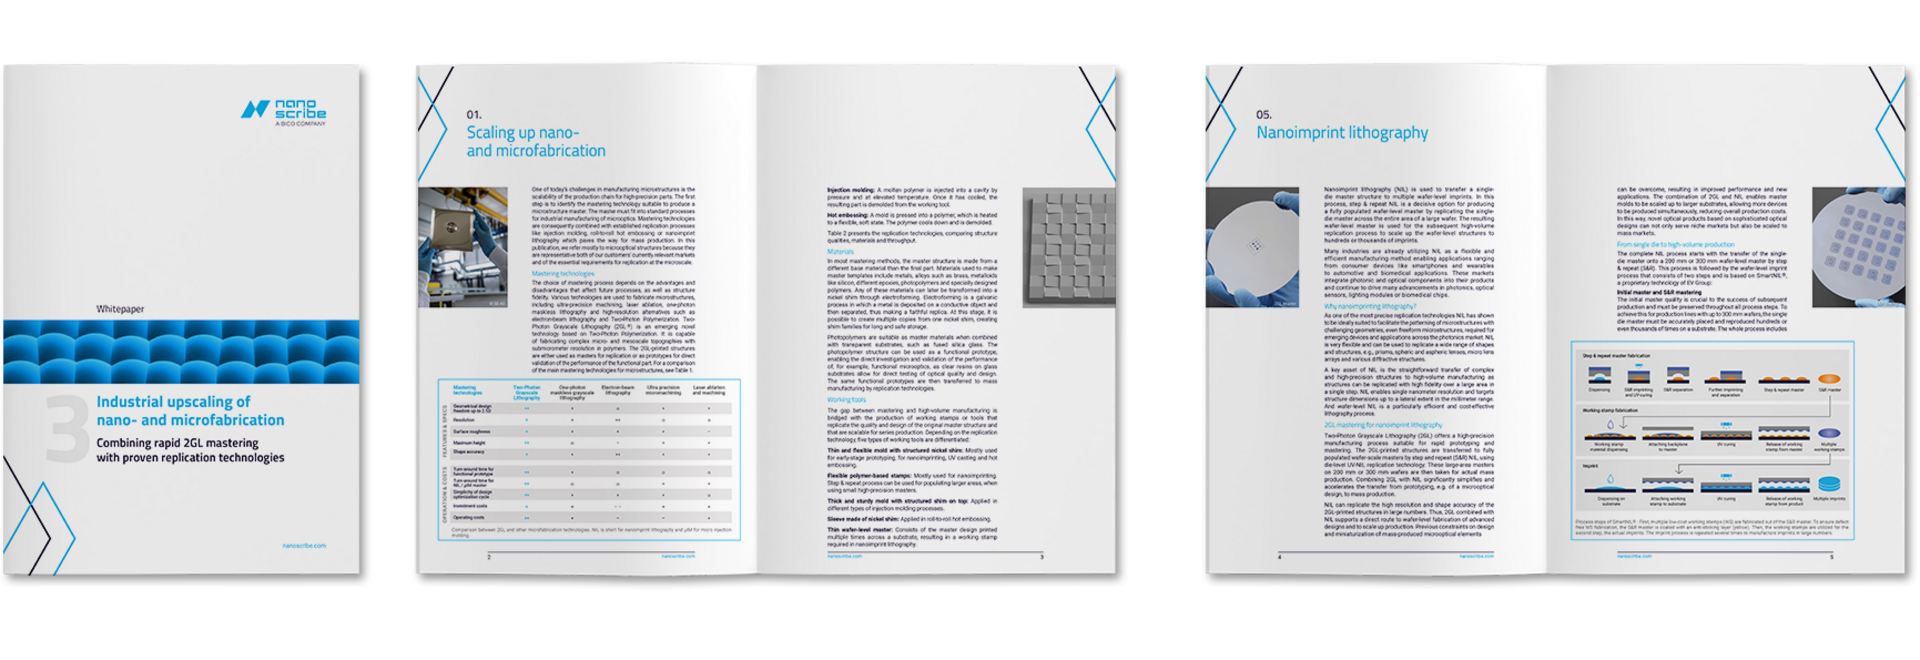 mockup of our third whitepaper on how to scale up nano- and microfabrication